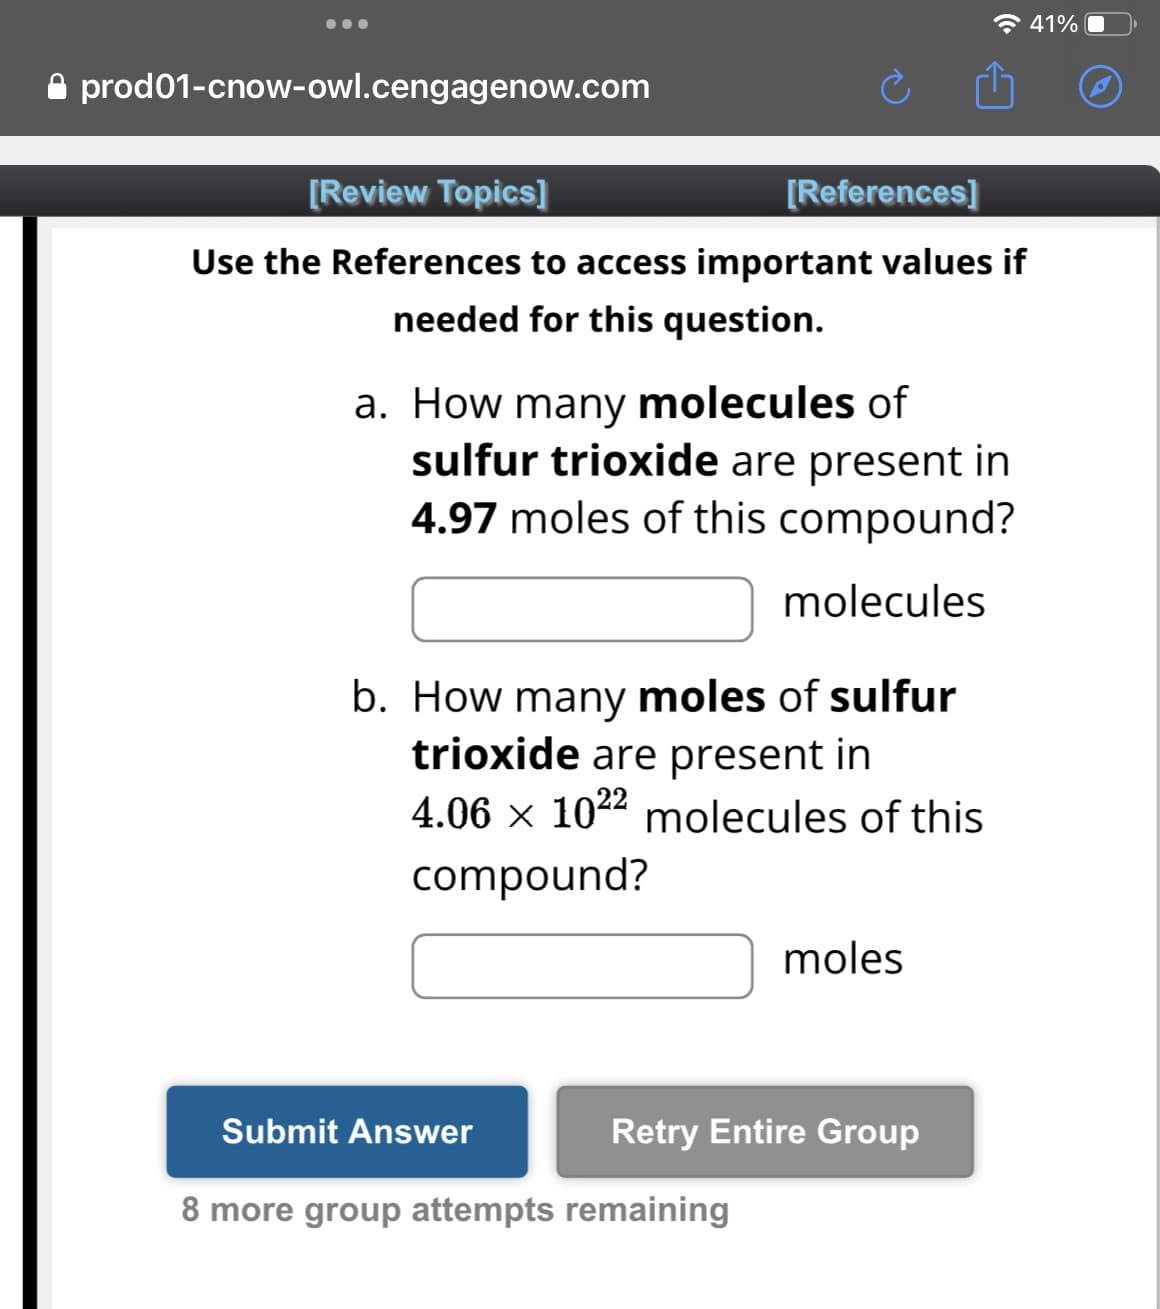 prod01-cnow-owl.cengagenow.com
[Review Topics]
Use the References to access important values if
needed for this question.
a. How many molecules of
sulfur trioxide are present in
4.97 moles of this compound?
molecules
[References]
b. How many moles of sulfur
trioxide are present in
4.06 × 102² molecules of this
compound?
Submit Answer
8 more group attempts remaining
moles
Retry Entire Group
41%